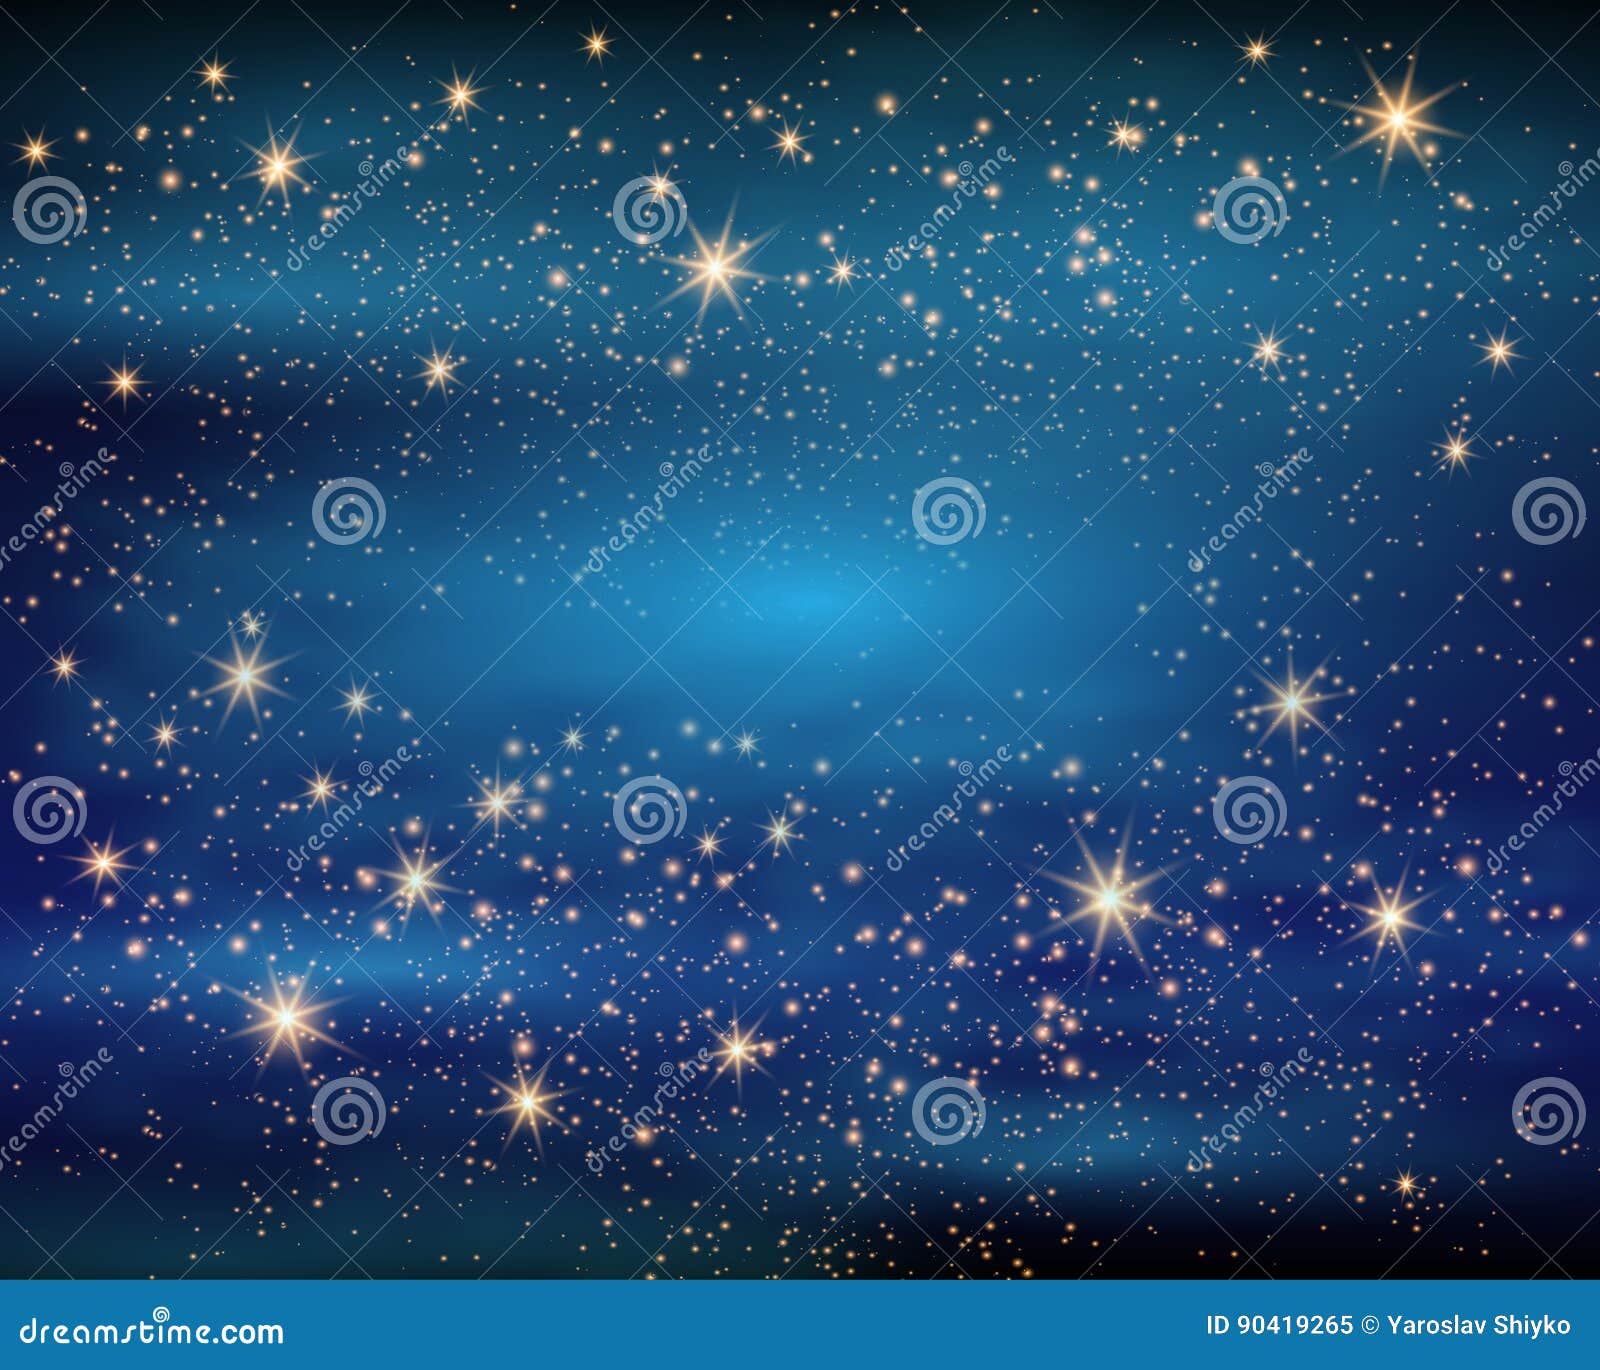 magic space. fairy dust. infinity. abstract universe background. blue gog and shining stars.  